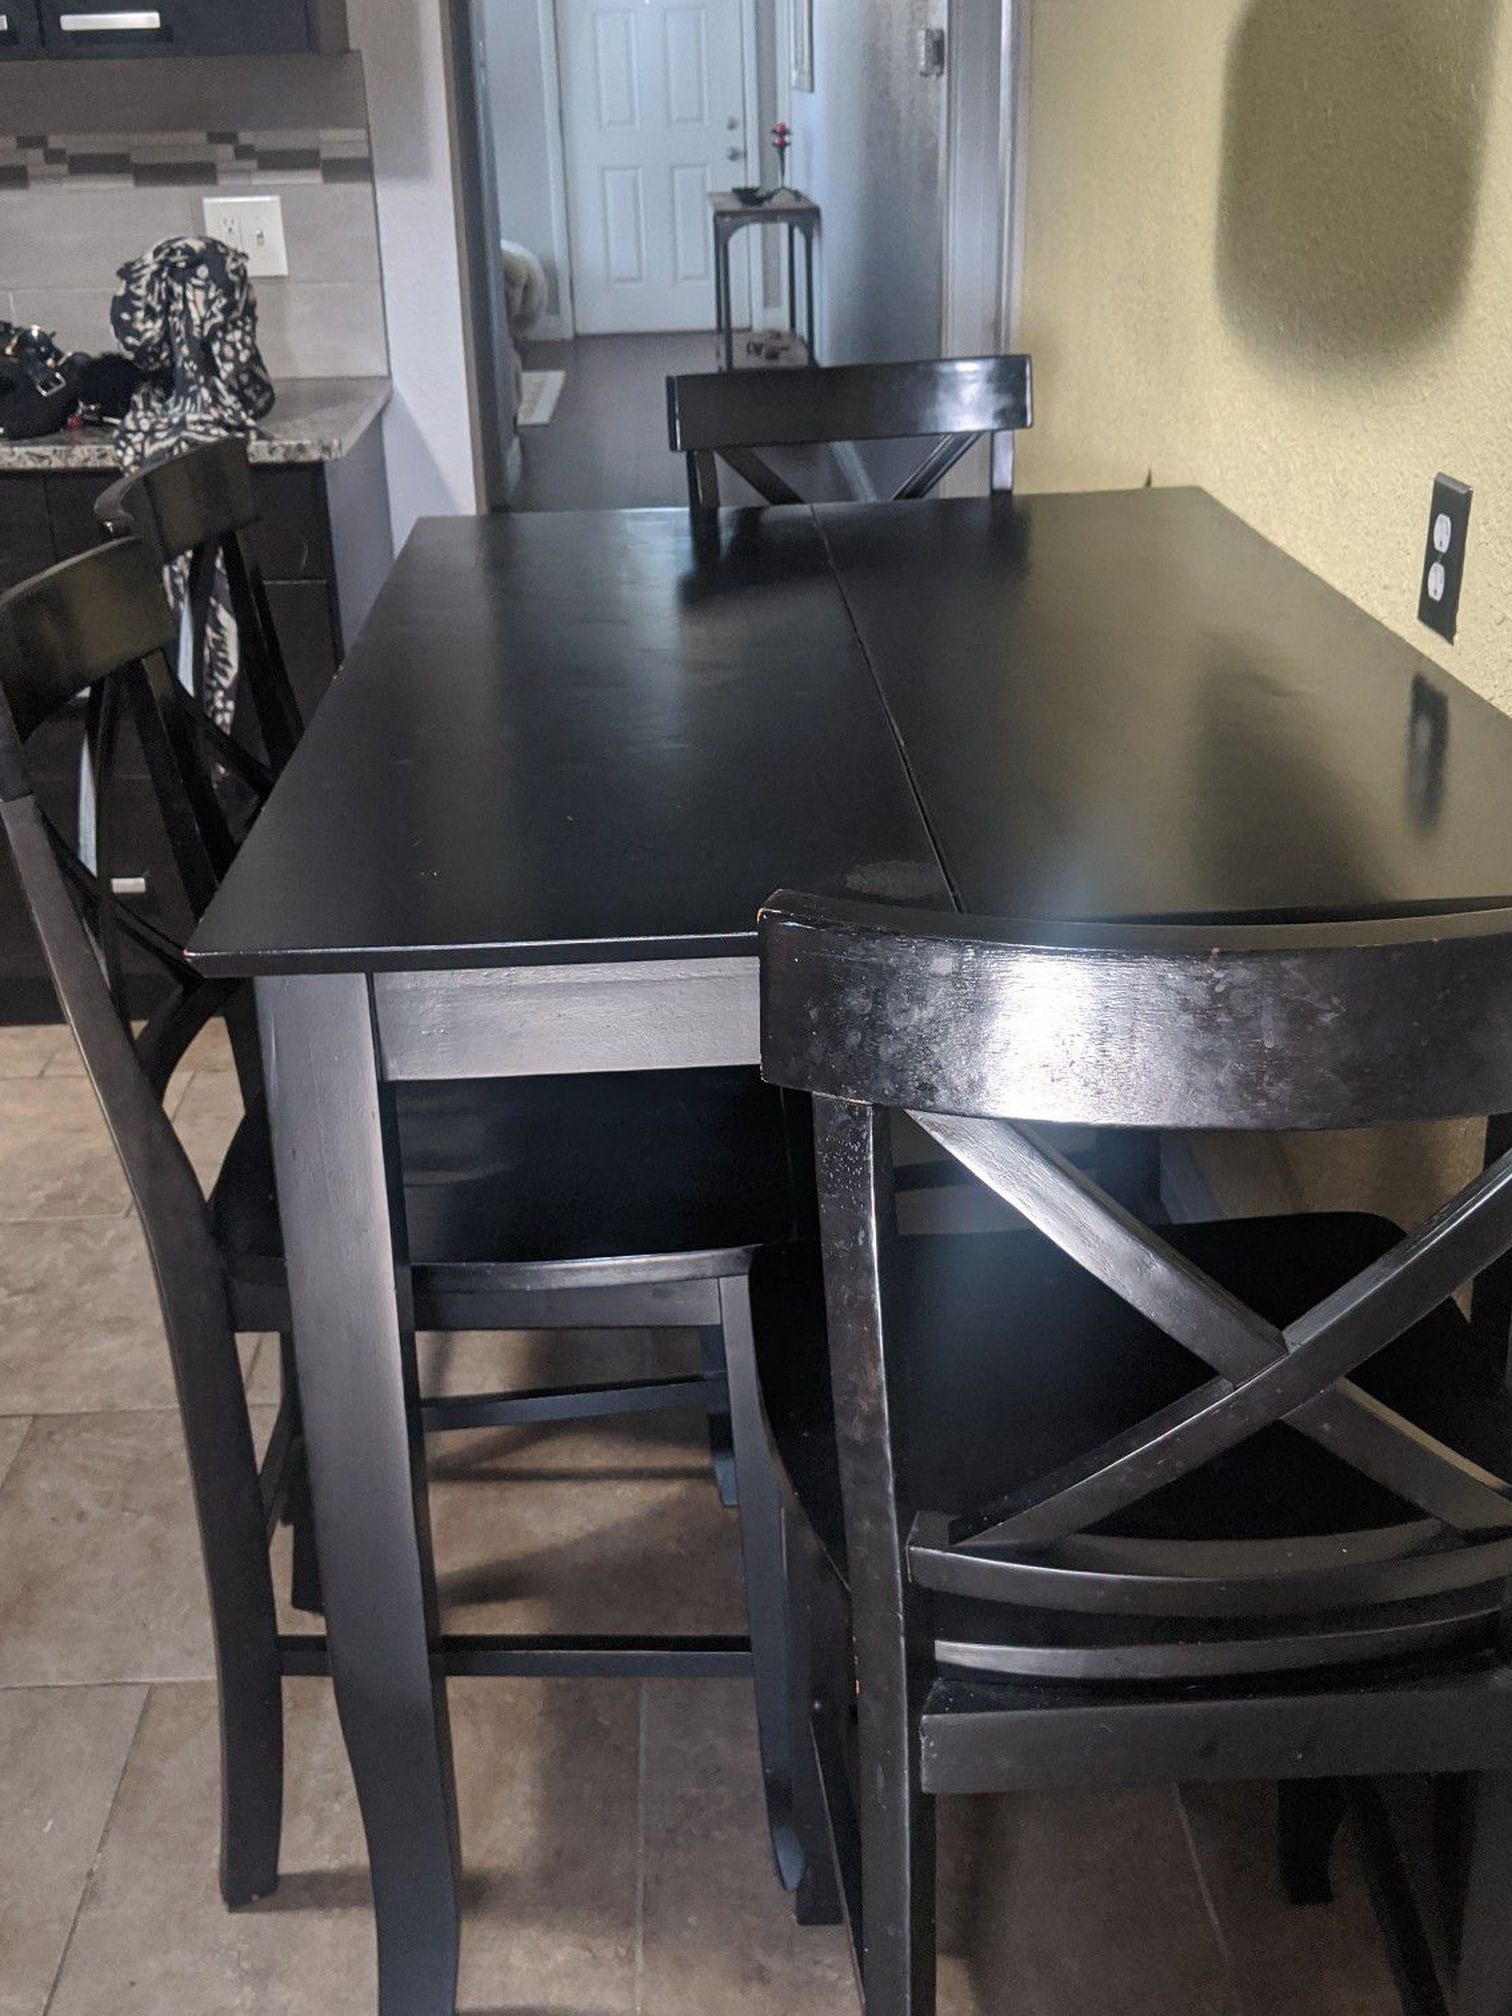 Black kitchen table and 4 chairs. Table expands in the middle.